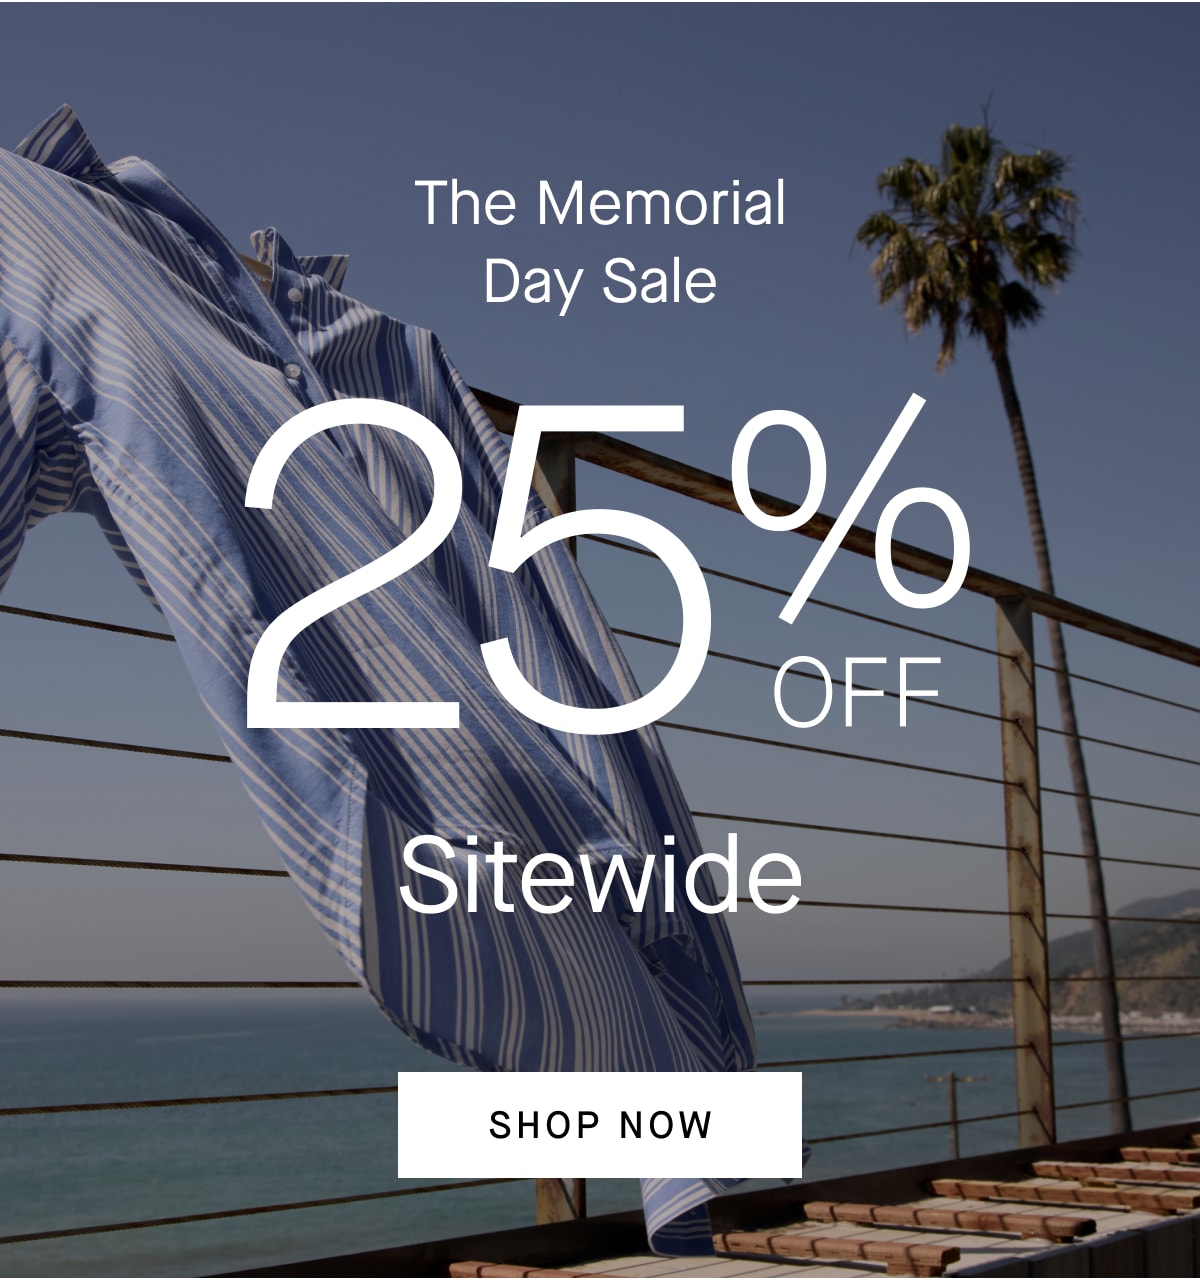 The Memorial Day Sale 25% OFF Sitewide [SHOP NOW]